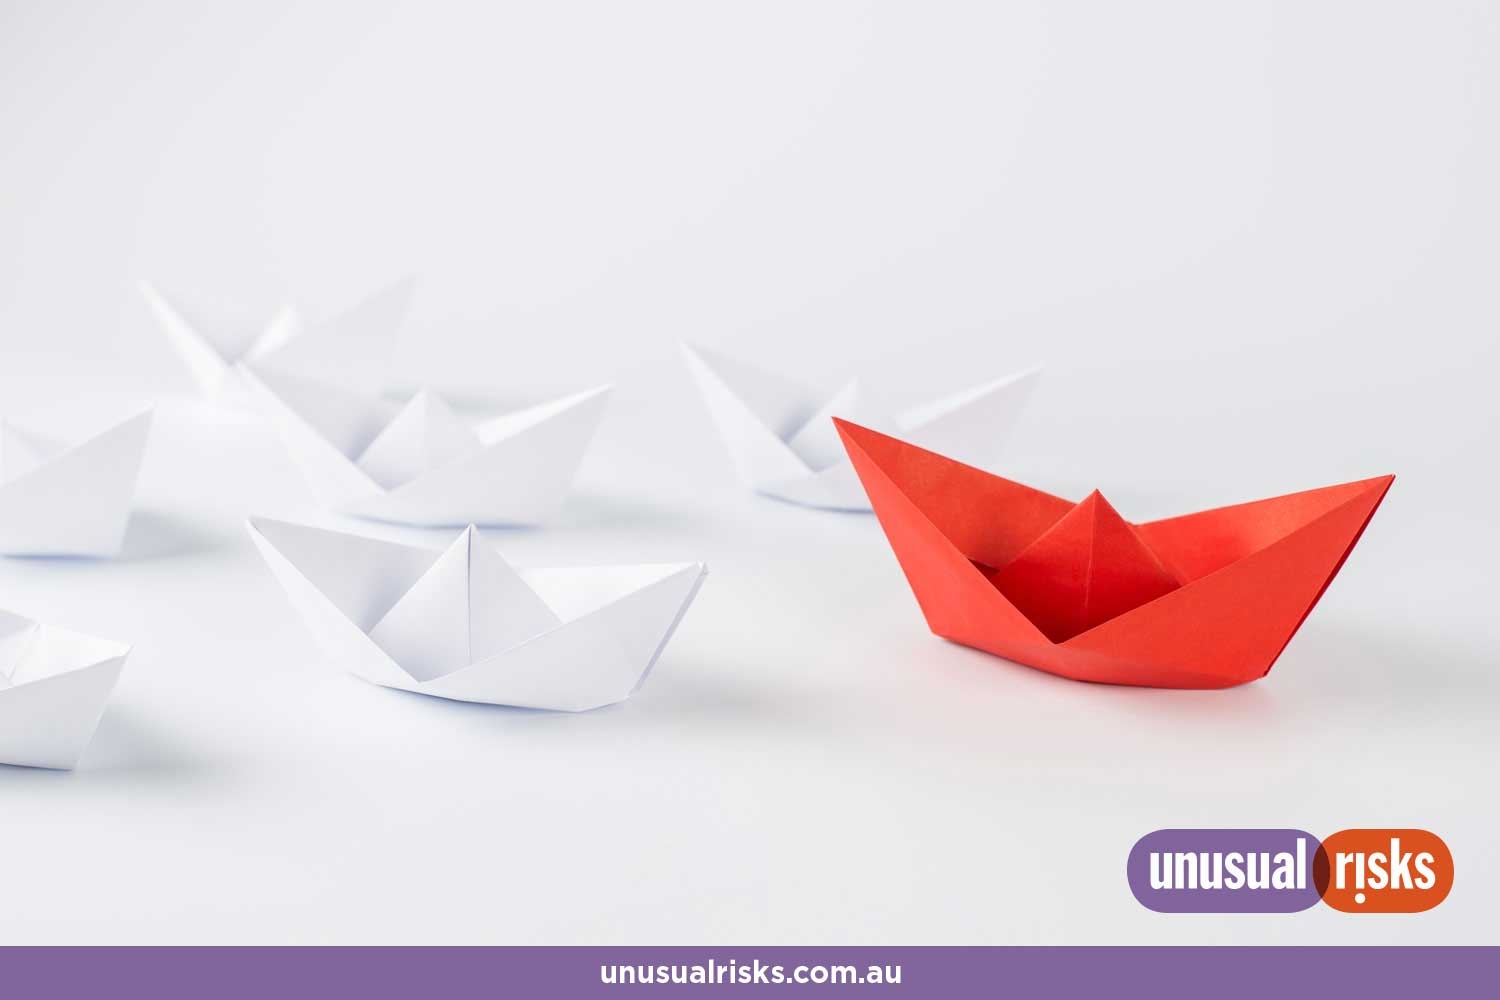 white paper boats with a red boat leading